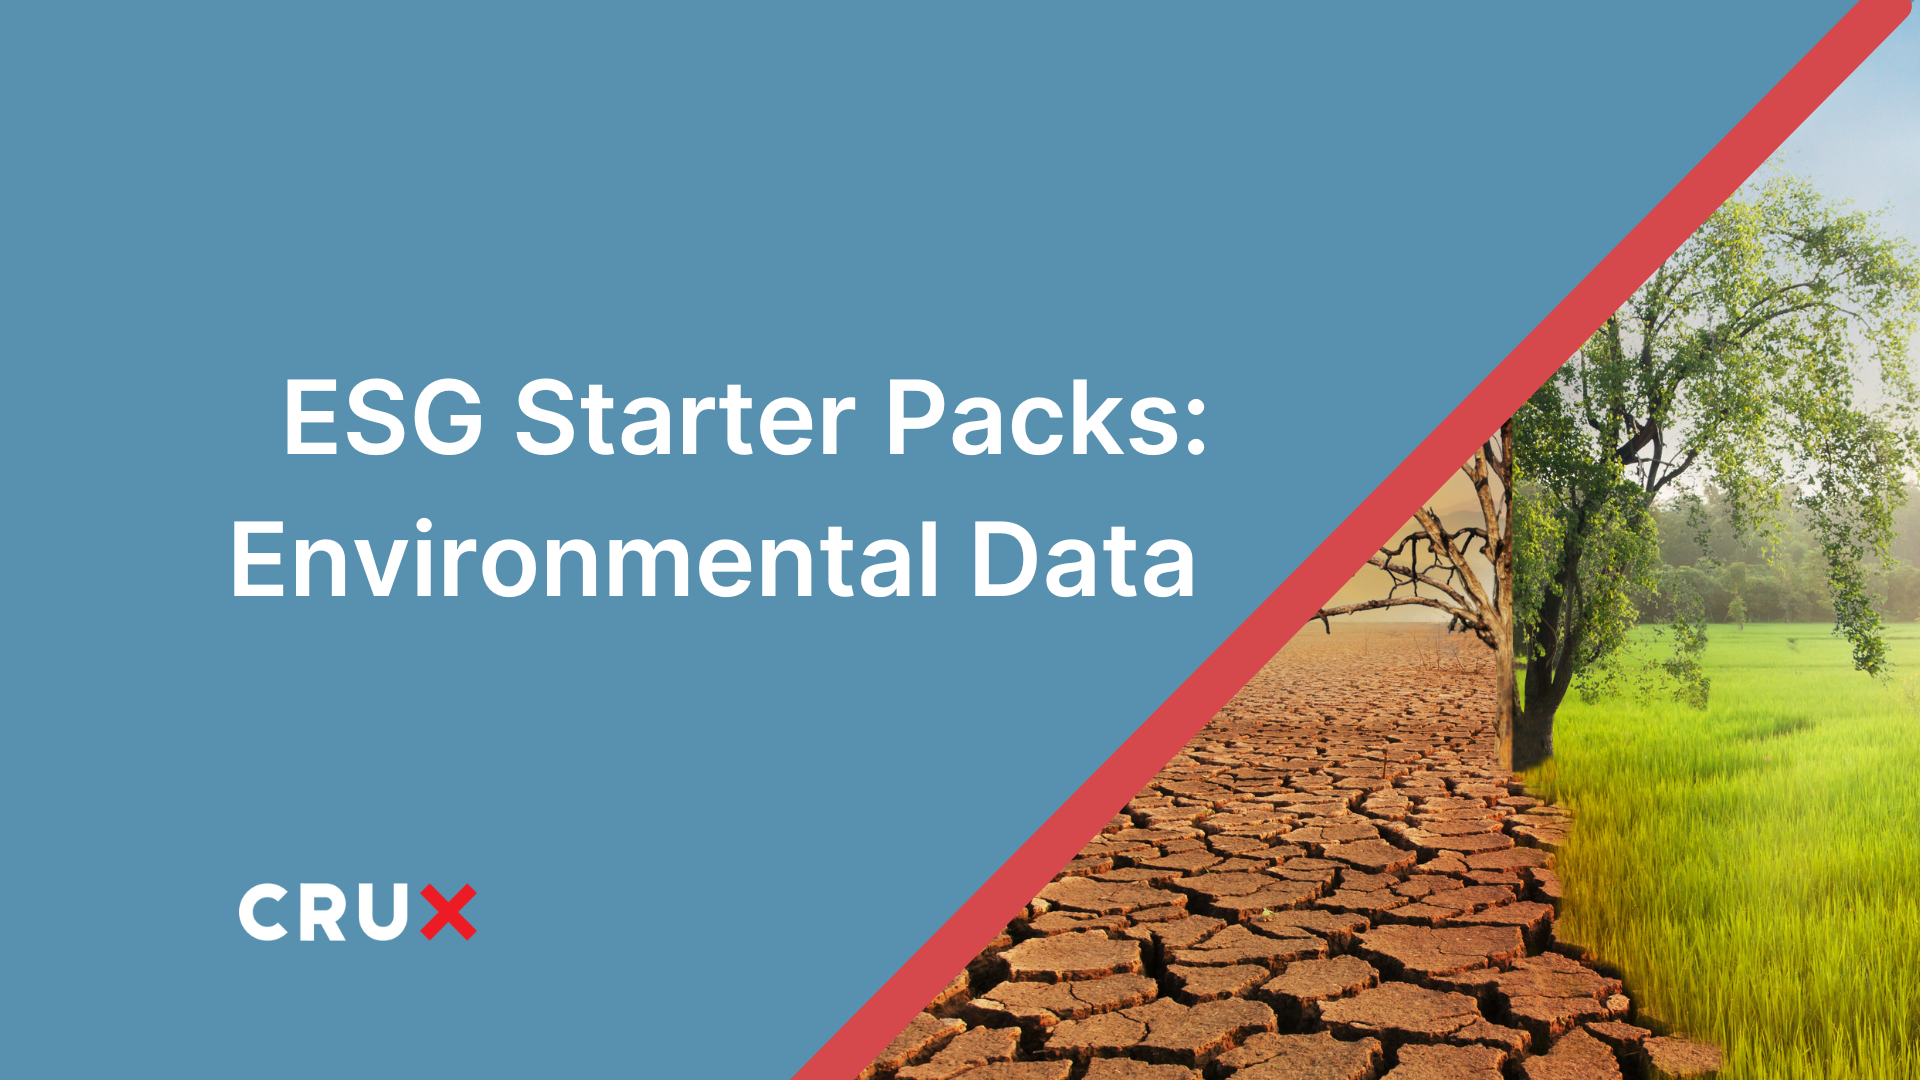 ESG Starter Packs: A Guide to Getting Started with Environmental Data